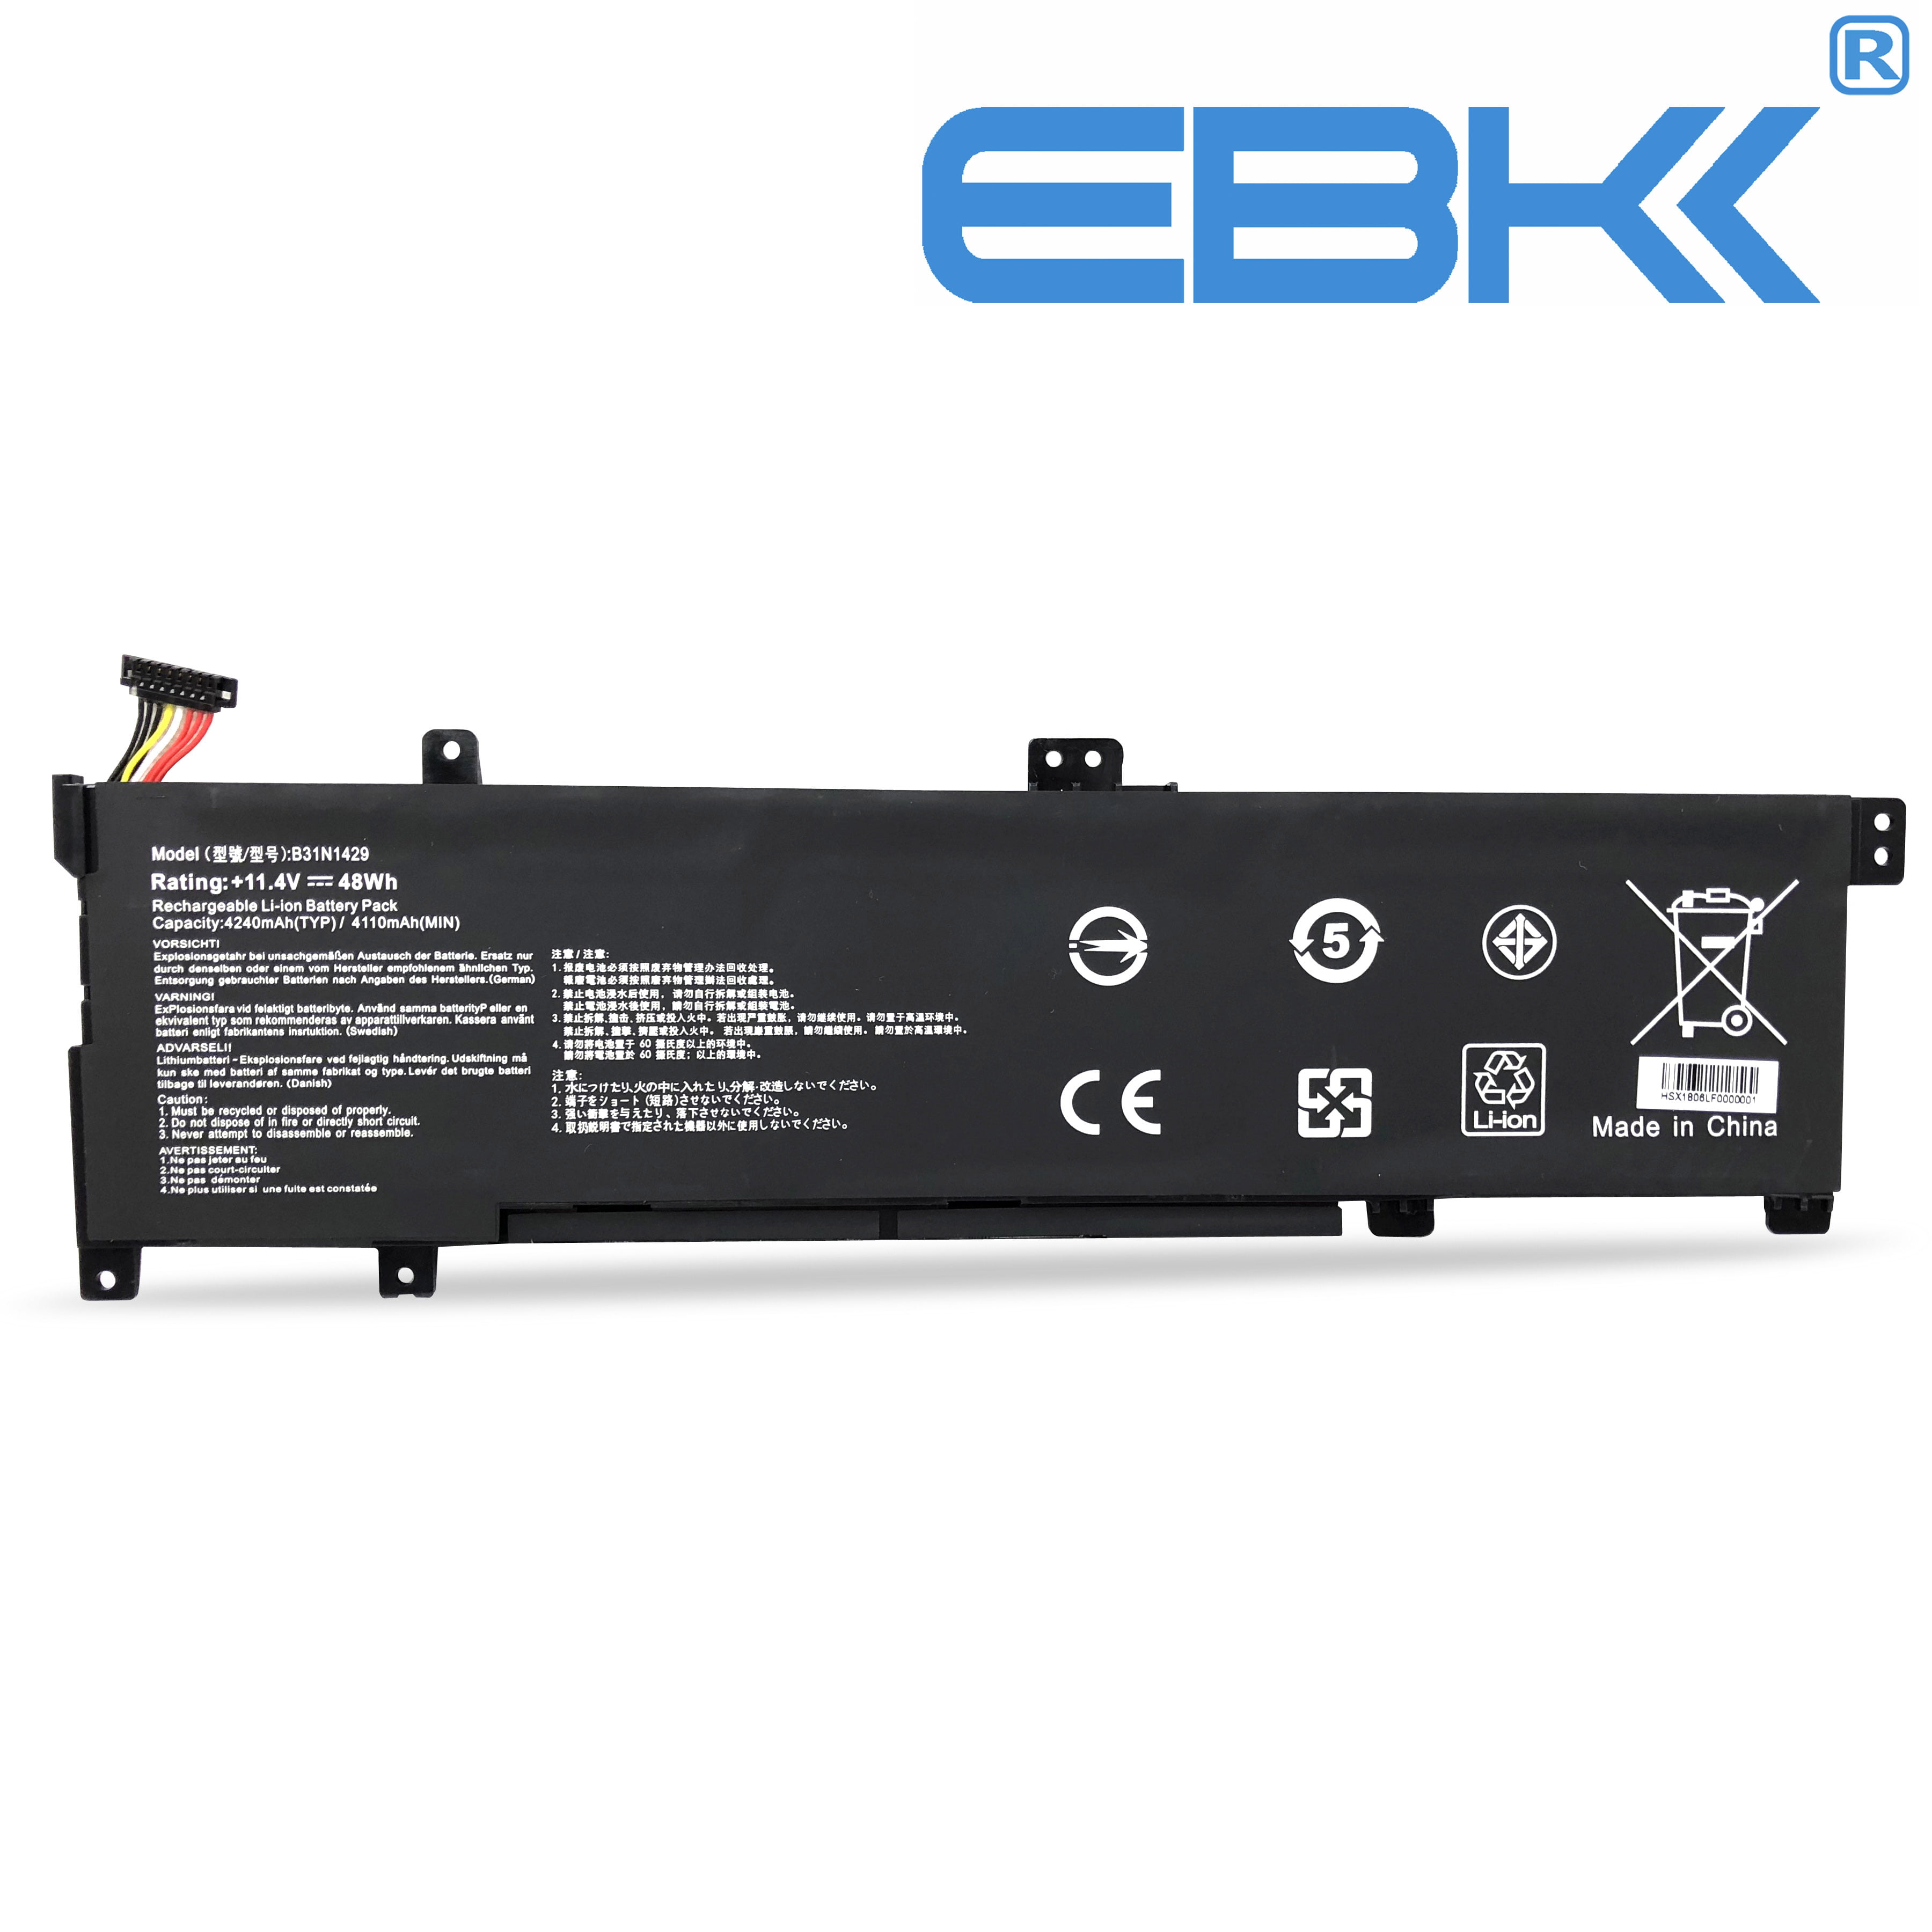 Immersion Displacement topic B31N1429 Battery for ASUS K501U K501UX K501UB K501UW K501LX K501LB K501UQ  K501UX-AH71 DM054H K501UB-DM097T K501LX-NH52 K501UW-AB78 AH71 NB72  A501C1-X1-D20-11.4V 48Wh 4240mAh - Walmart.com